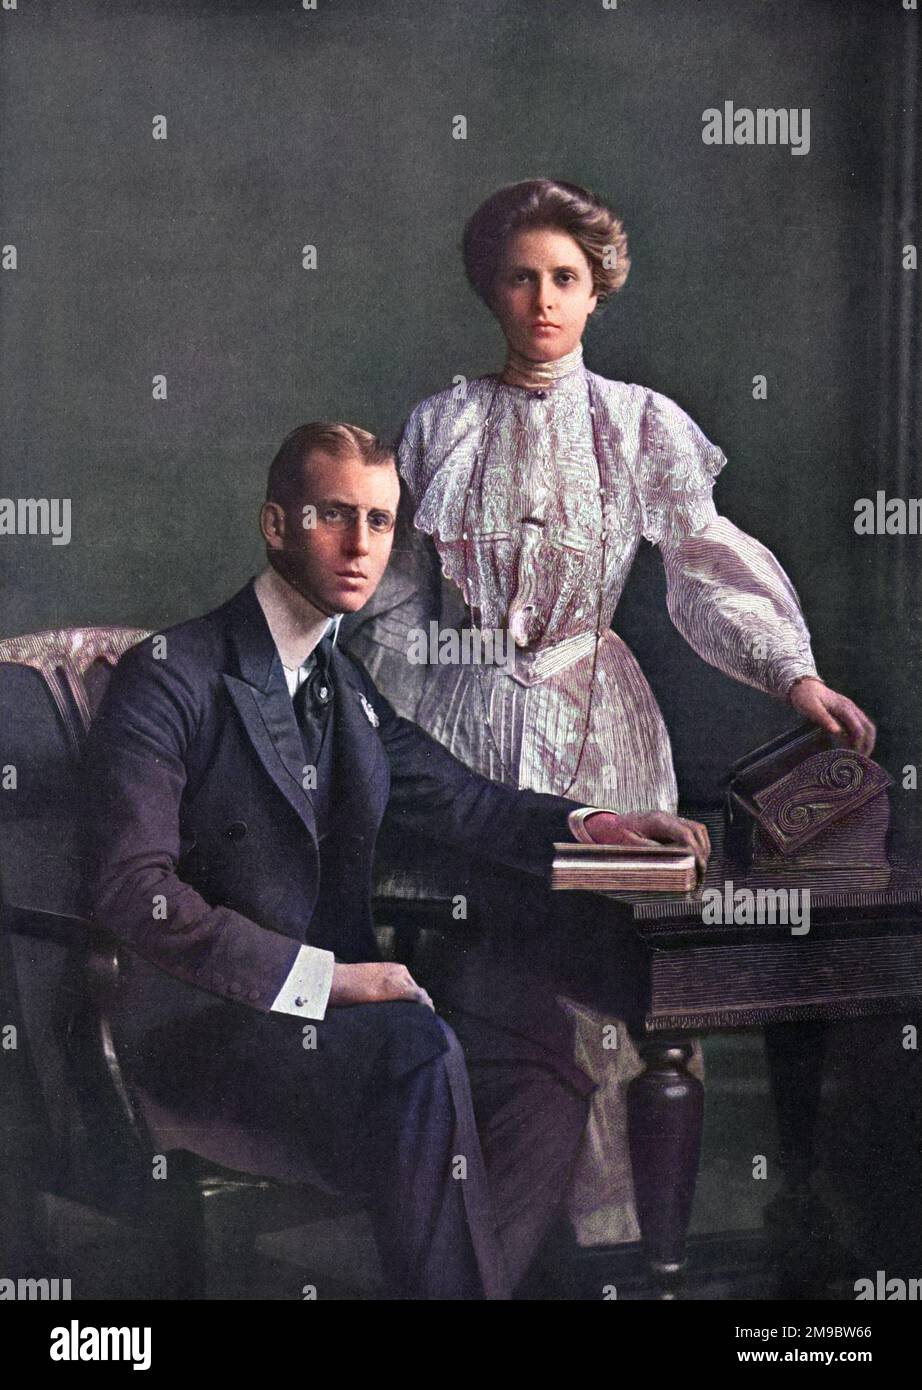 Prince Andrew of Greece (1882 - 1944), fourth son of King George I of Greece (and a nephew of Queen Alexandra) together with his fiancee, Princess Alice of Battenberg (1885  - 1969), eldest child of Princess Victoria of Hesse and Prince Louis of Battenberg.  Pictured shortly before their marriage in 1903.  They are the parents of Prince Philip, Duke of Edinburgh. Stock Photo